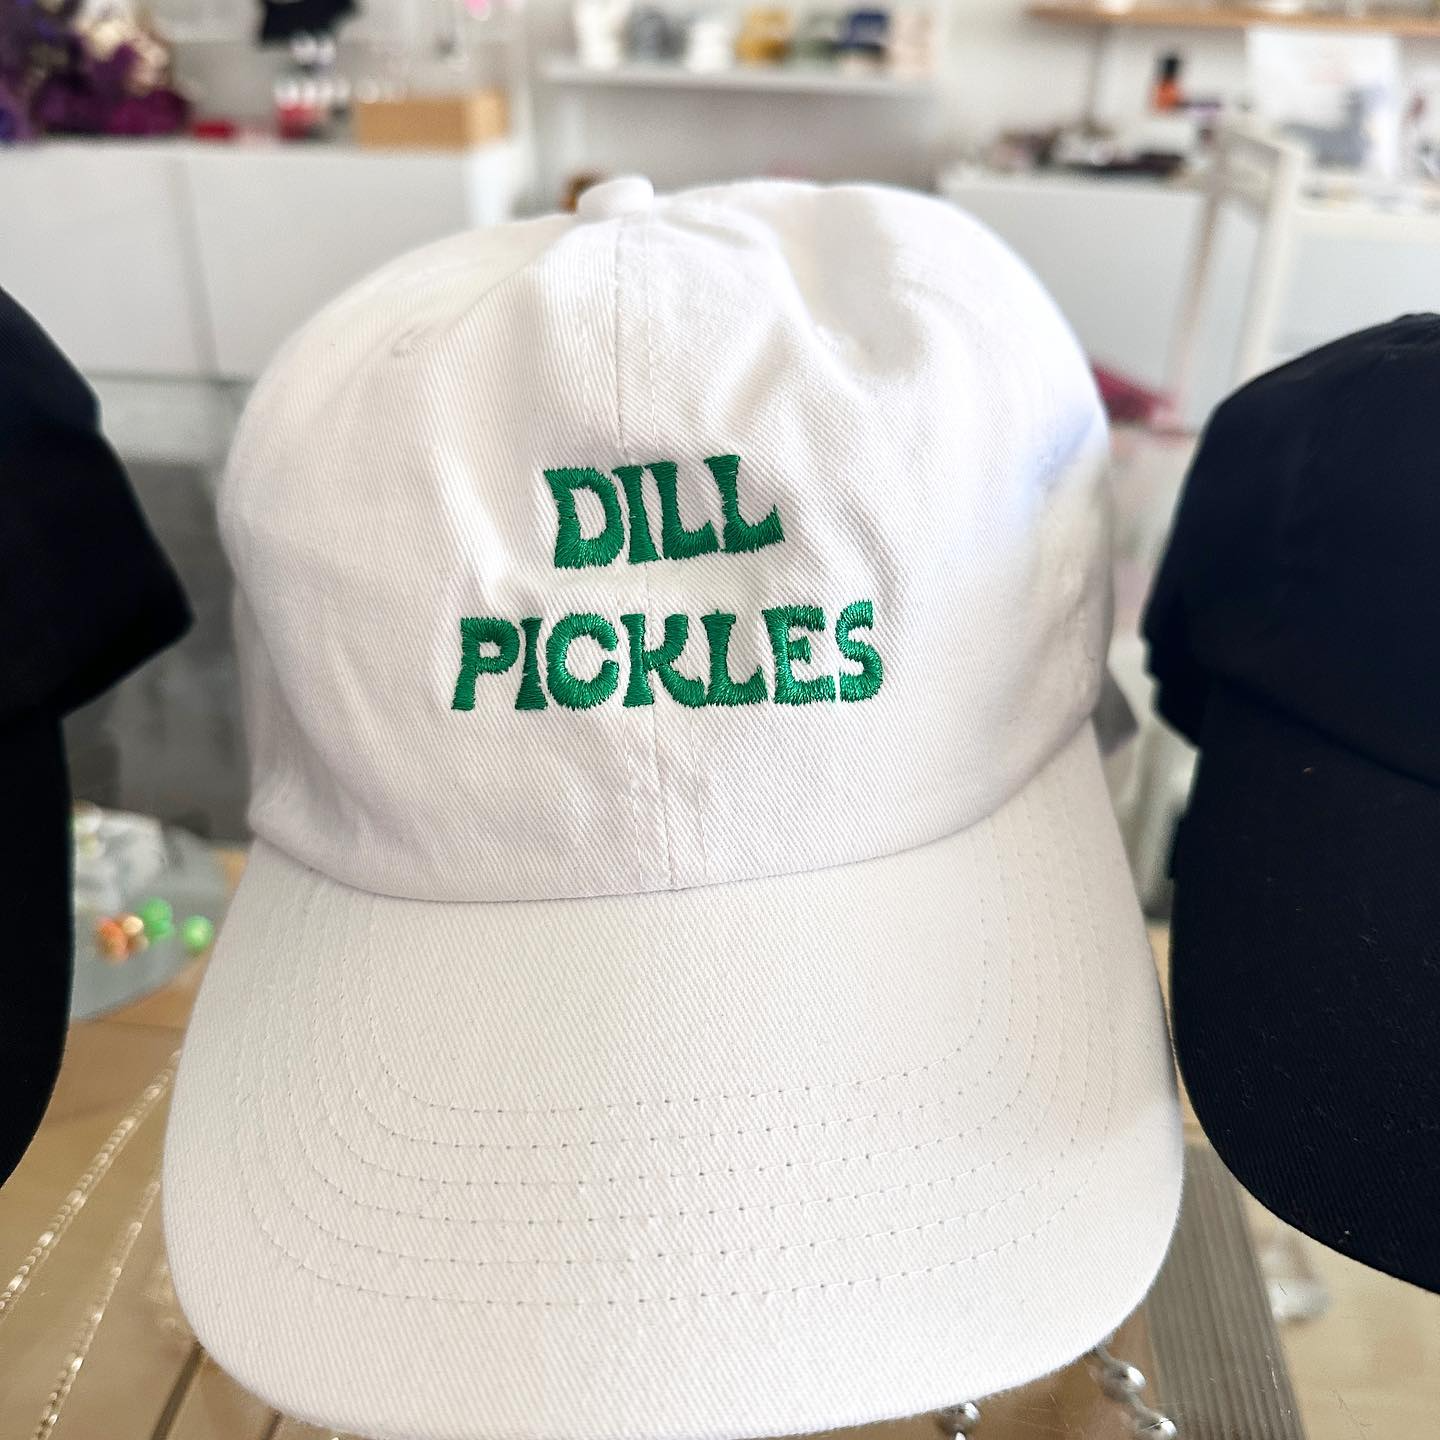 Dill Pickles Baseball Hat - The Crowd Went Wild